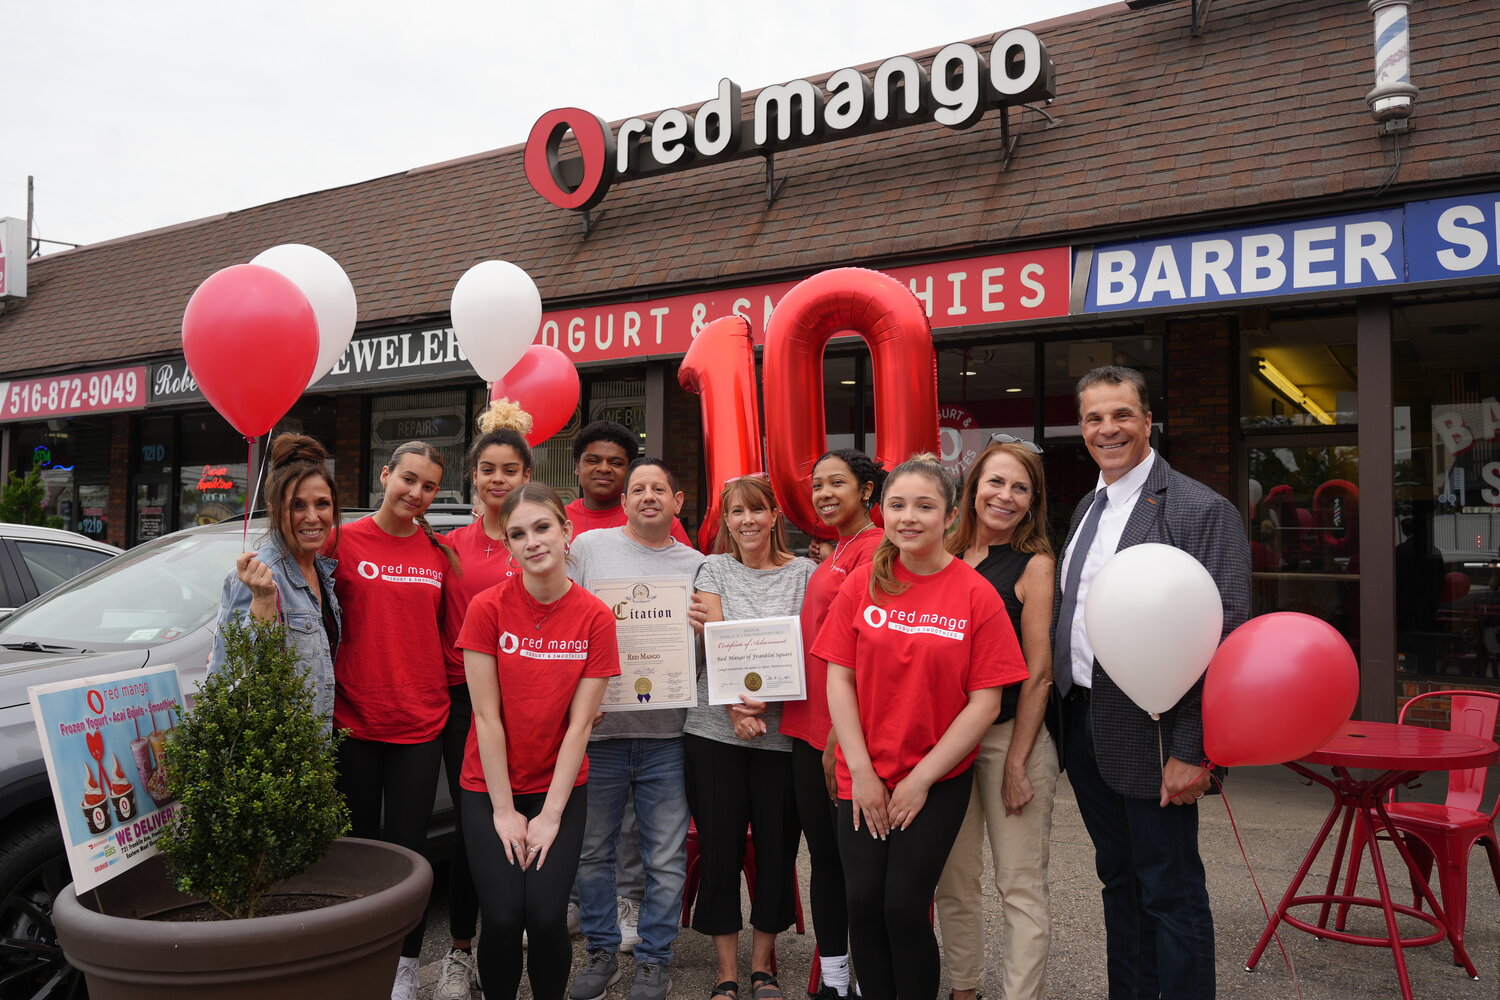 Chris Cianciulli, center left, celebrates a decade of operating his Red Mango in Franklin Square  on May 13 with his staff and local elected officials.